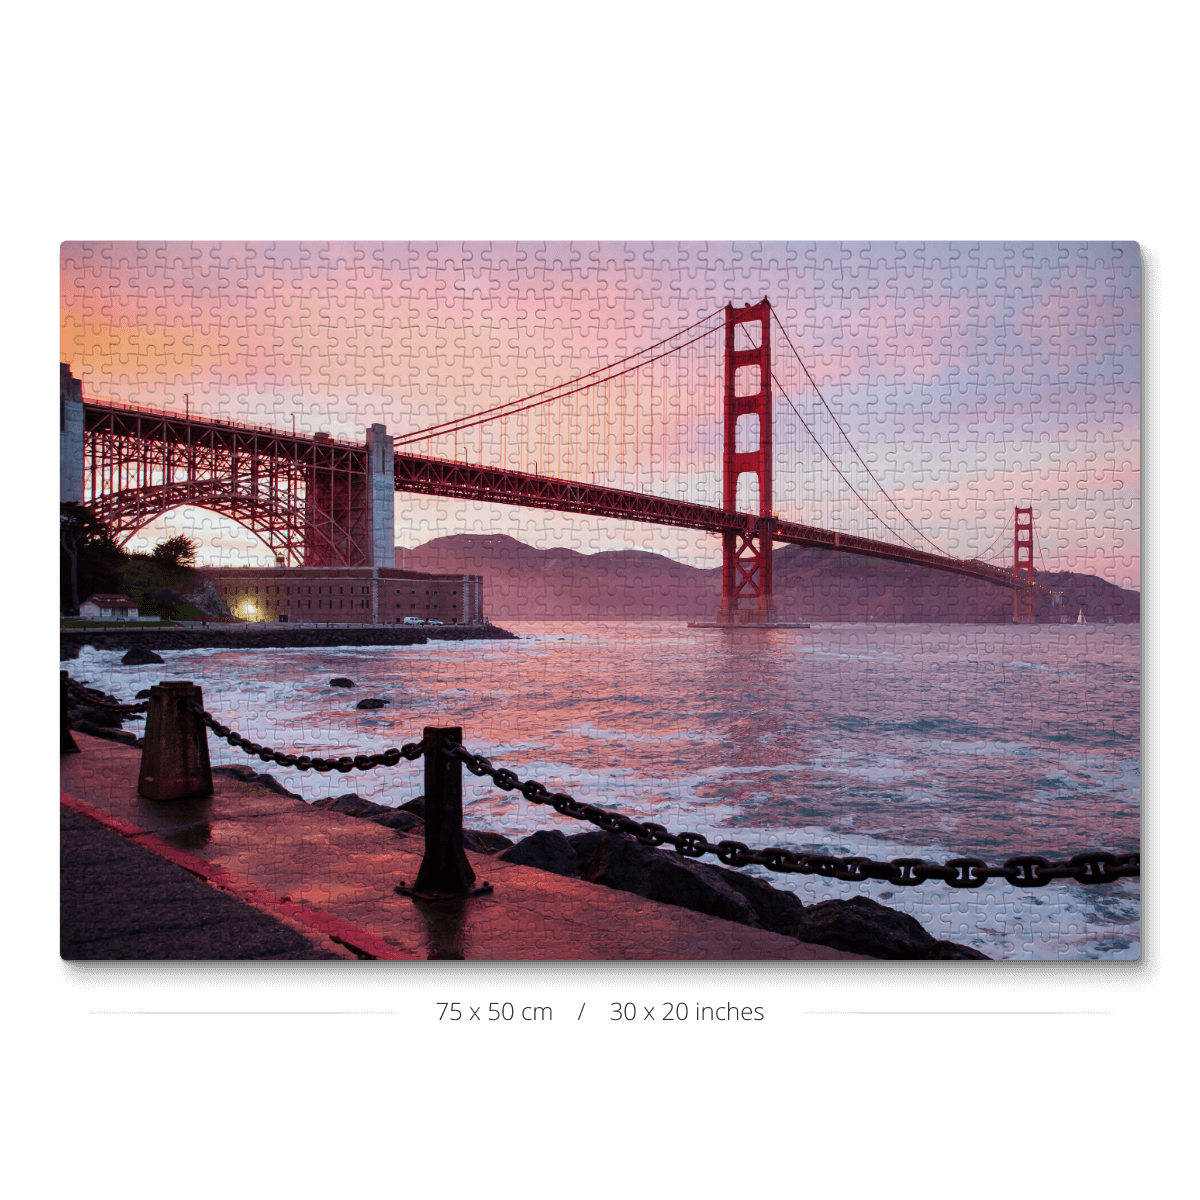 A 1000-piece jigsaw puzzle featuring a photo of the iconic Golden Gate Bridge at sunset.